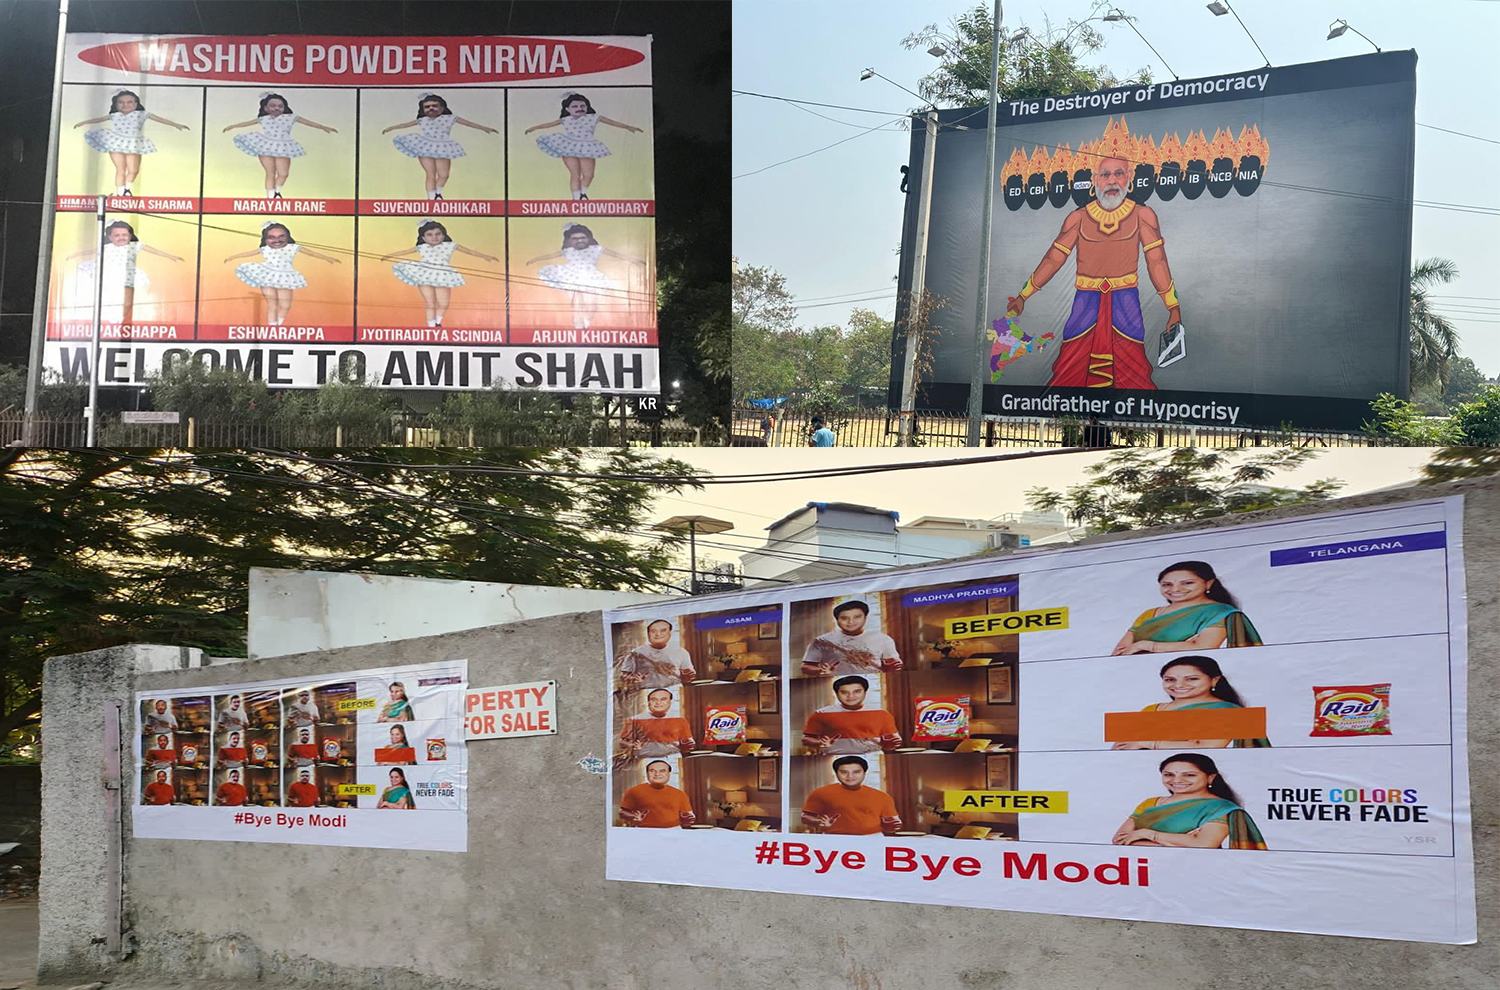 Mocking Posters Welcome Amit Shah to Hyderabad Ahead of CISF Raising Day Parade